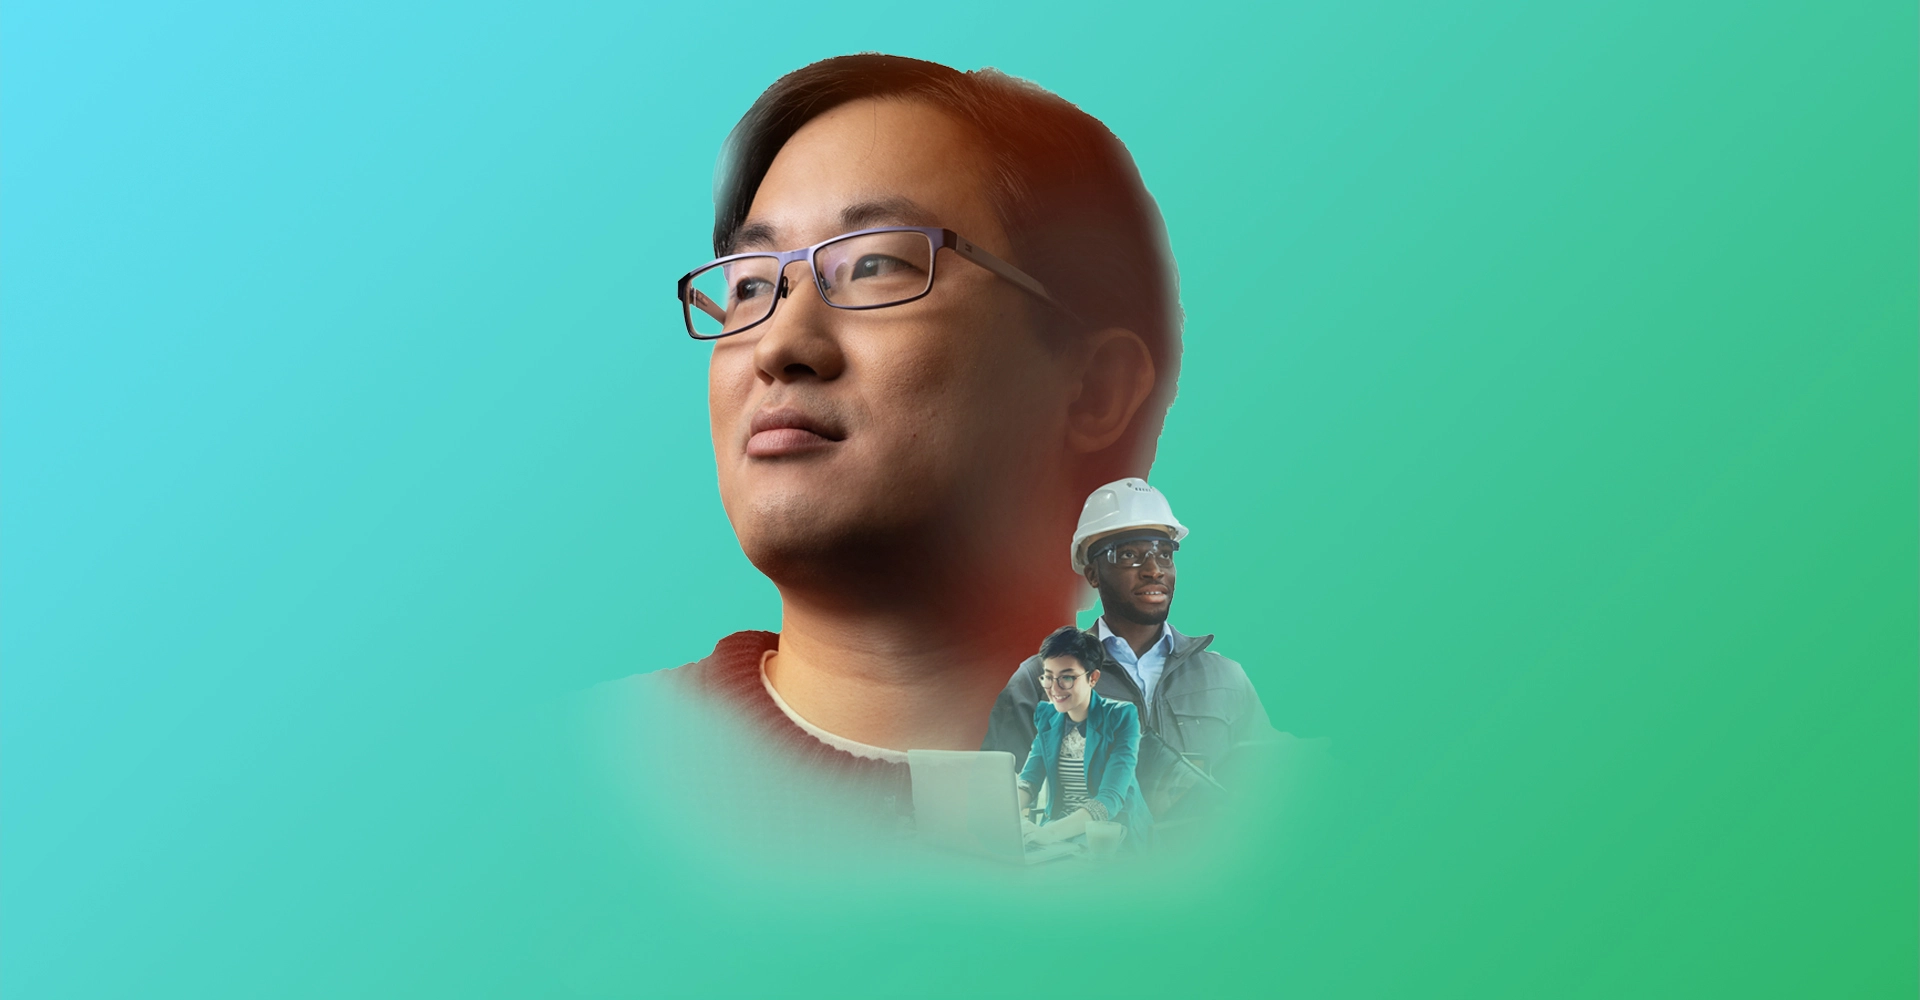 Home office - A man with a hard hat on and a man looking into the distance with glasses on, with a blue to green gradient background